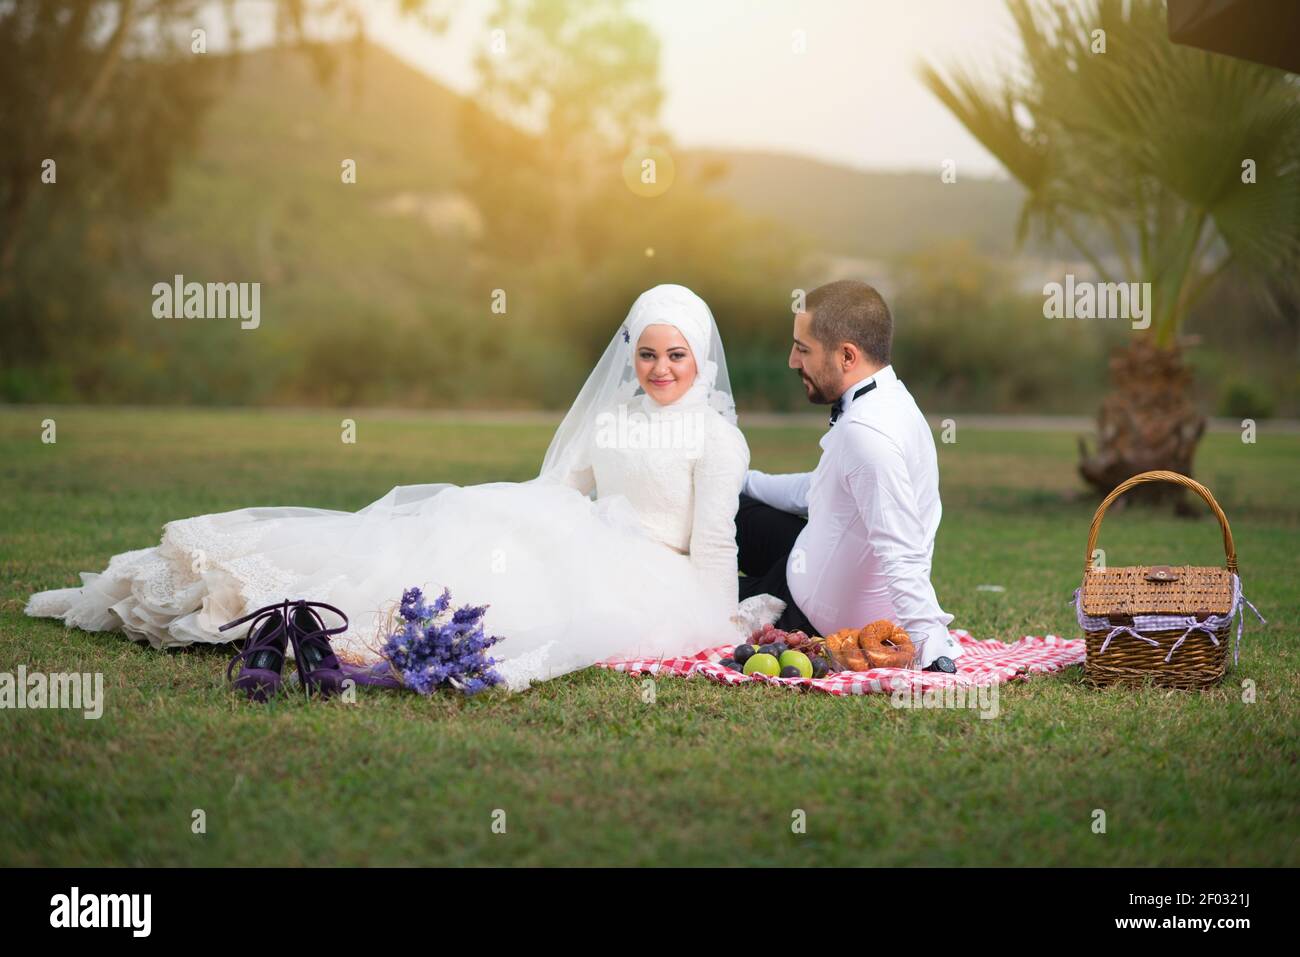 IZMIR, TURKEY - Sep 08, 2017: Young muslim bride and groom wedding photos, outdoors casual clothing and fromal wedding dress and suit. Stock Photo